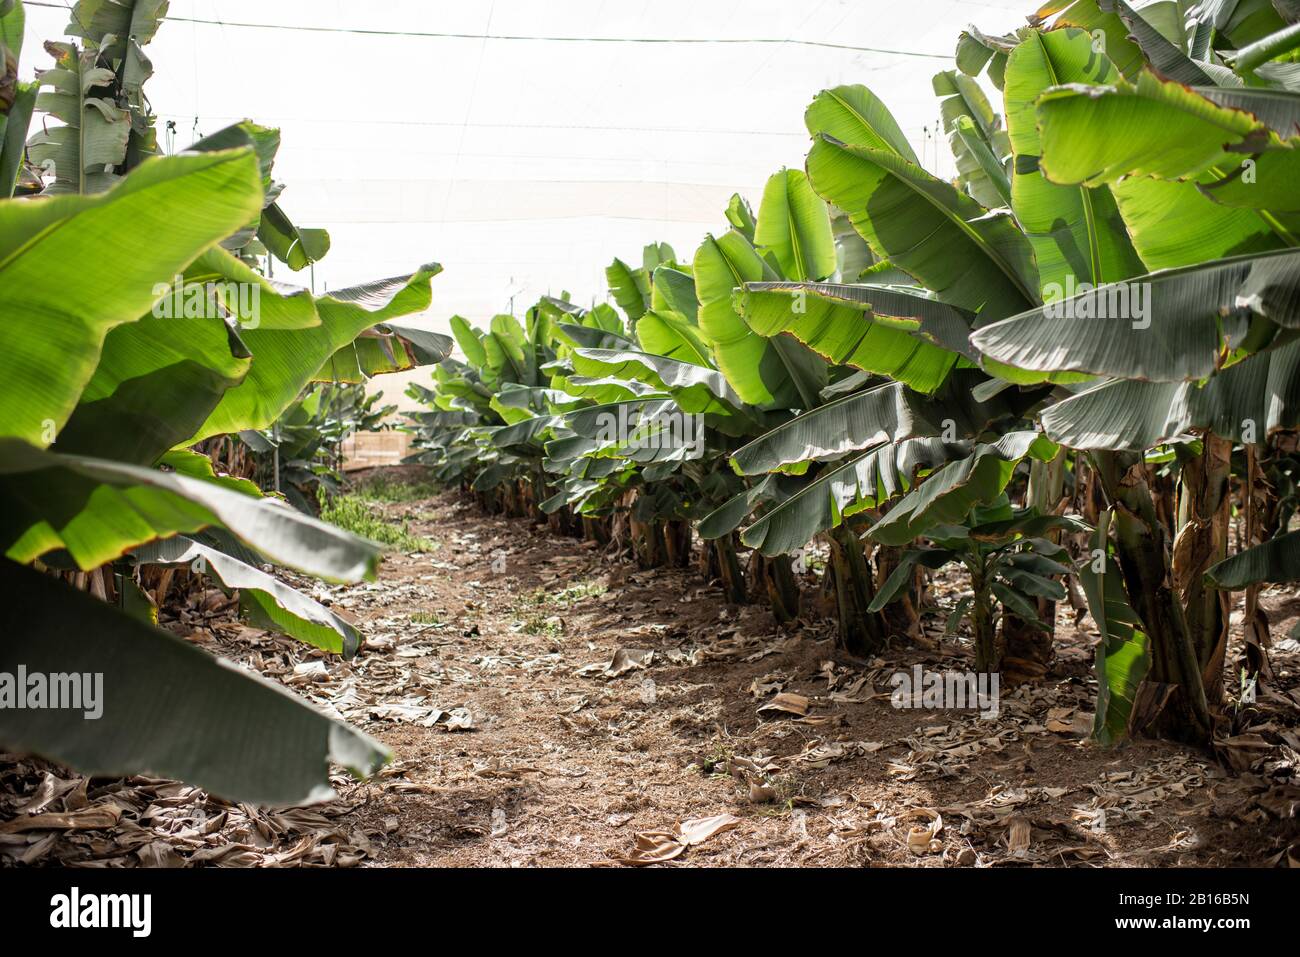 Rows with a young banana trees growing on the plantation Stock Photo